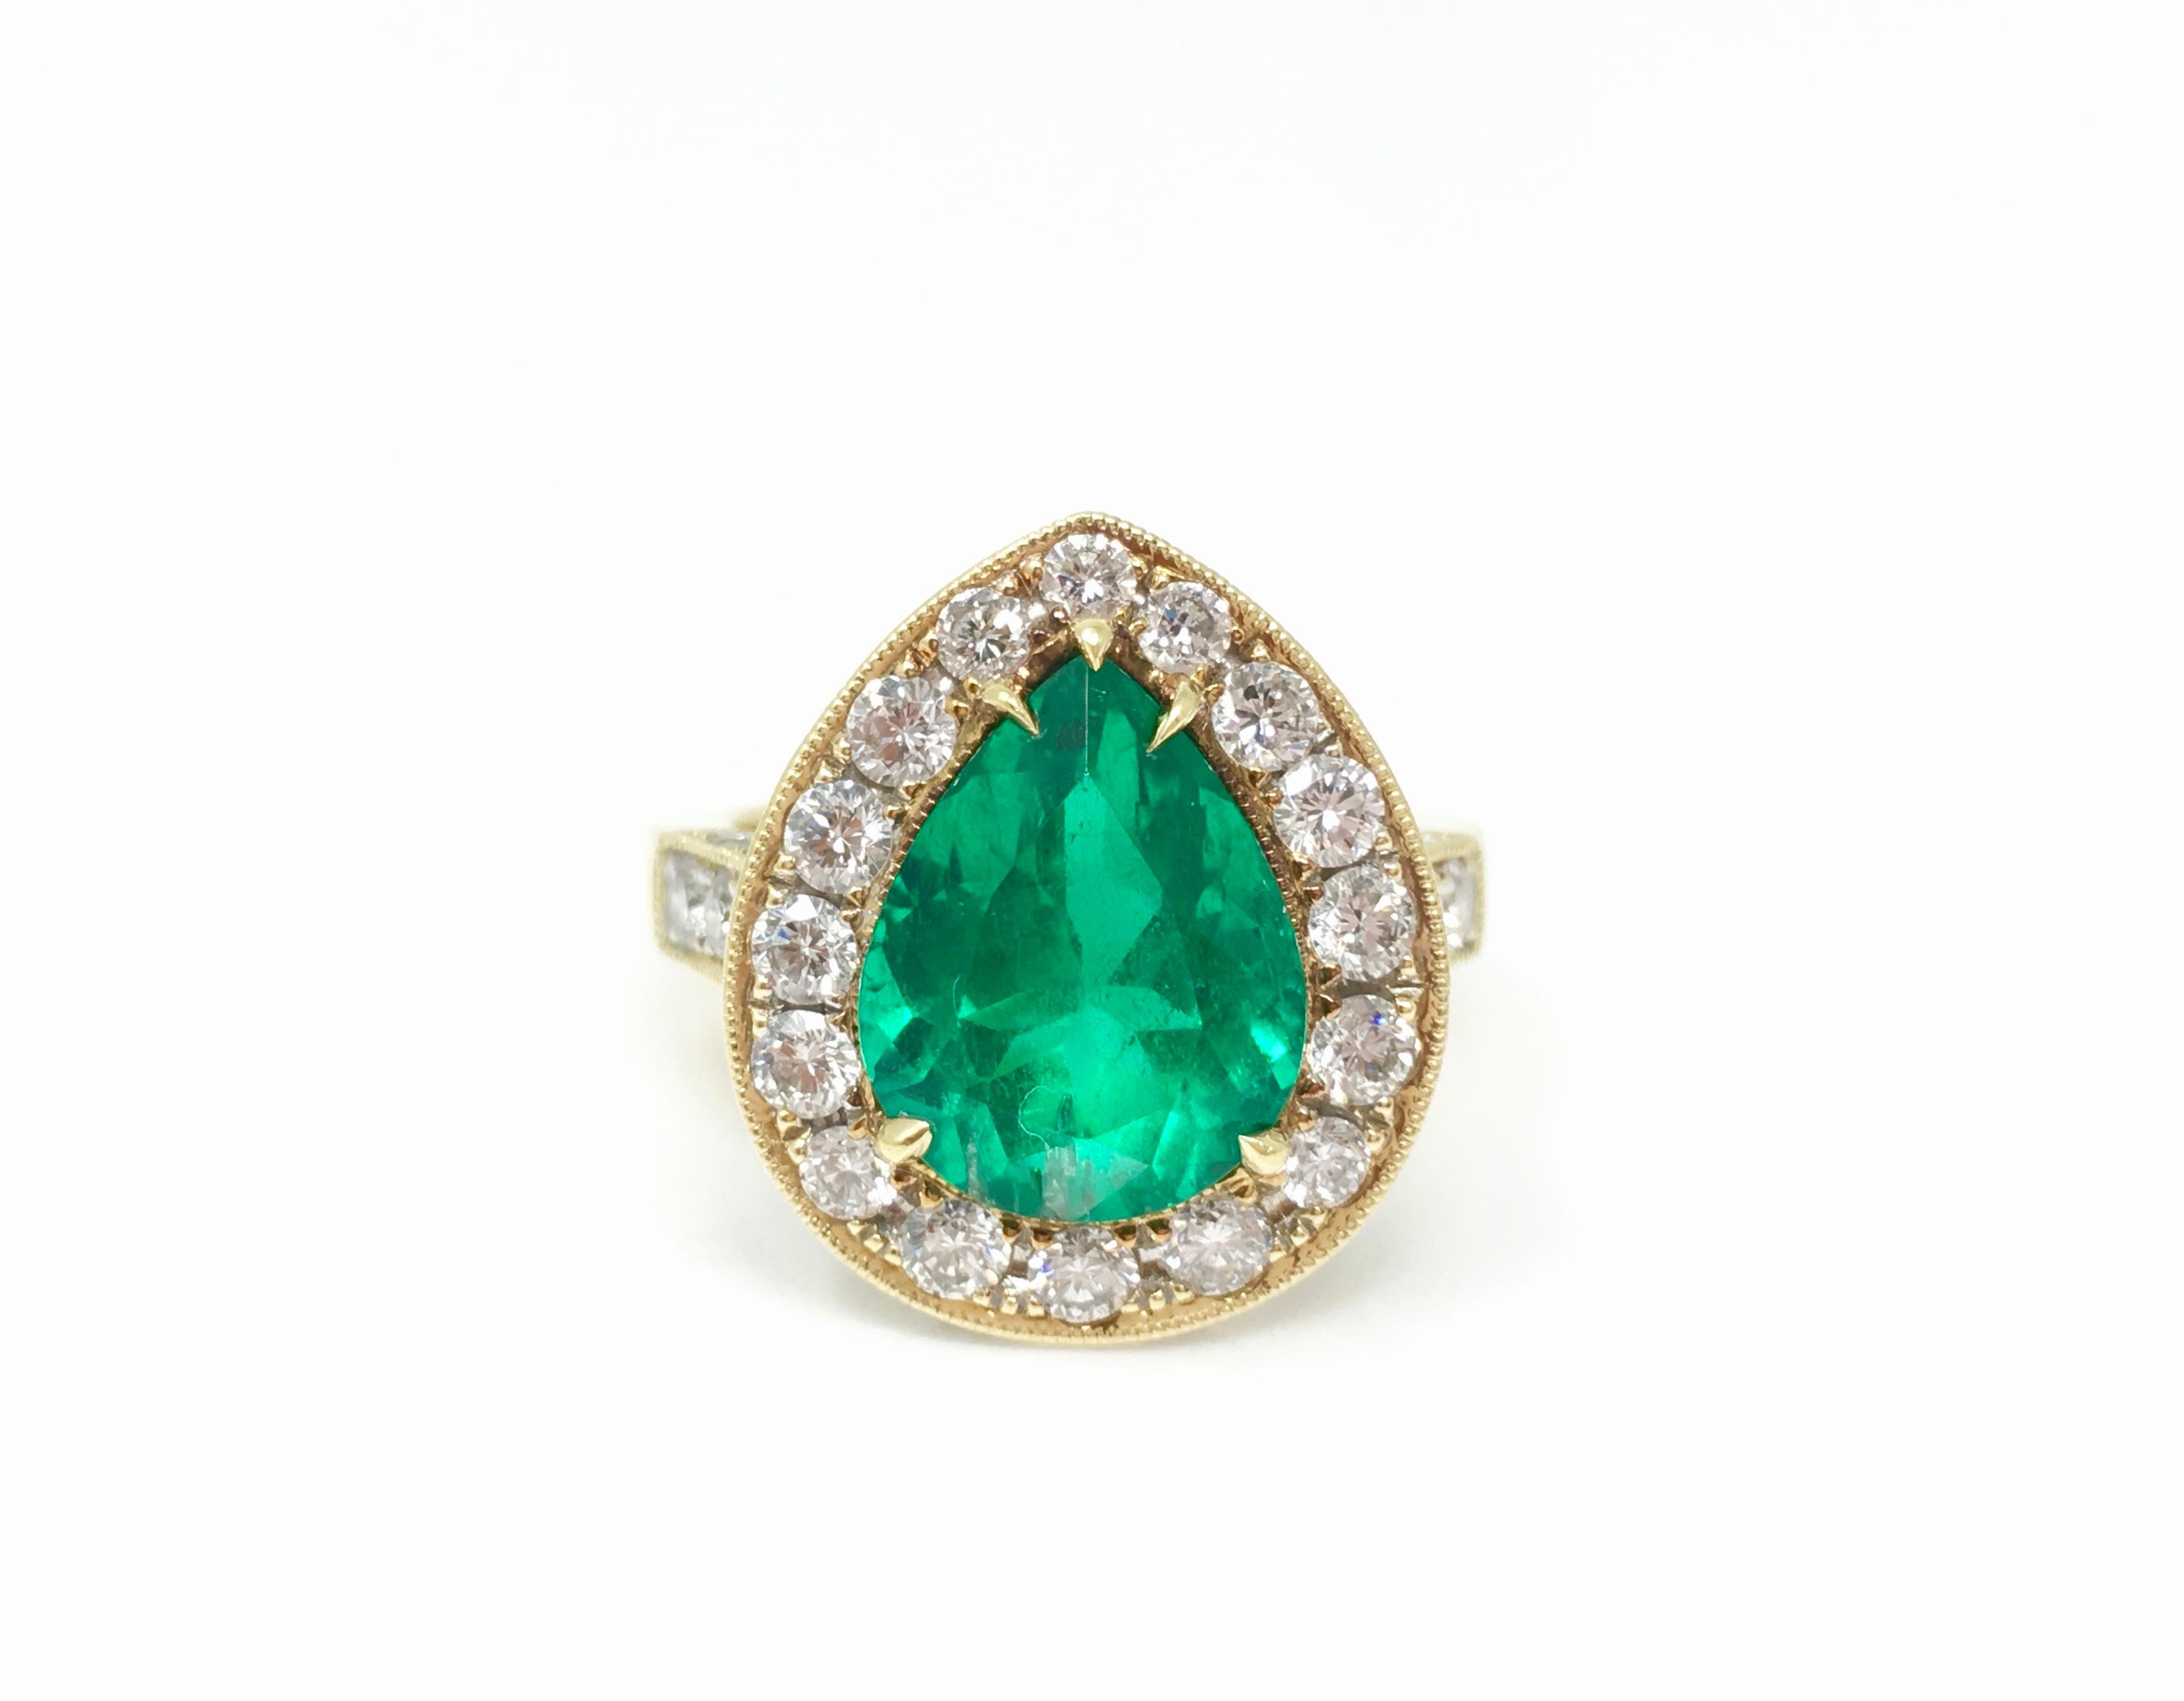 Pear Cut 3.25 Carat Emerald and Diamond Engagement Ring in 18K Yellow Gold